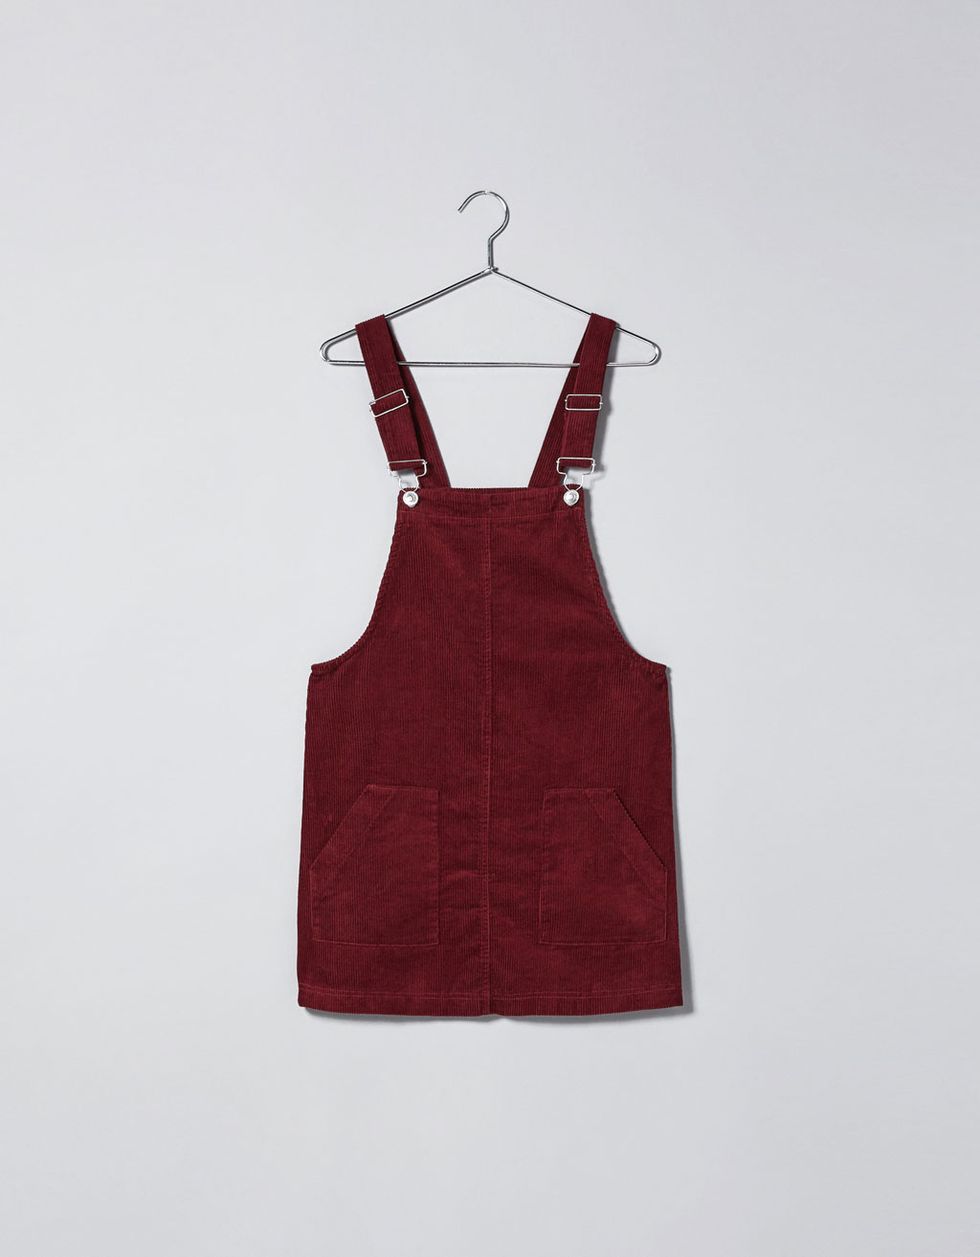 Clothing, Maroon, One-piece garment, Dress, Clothes hanger, Outerwear, Cocktail dress, Pattern, Design, Day dress, 